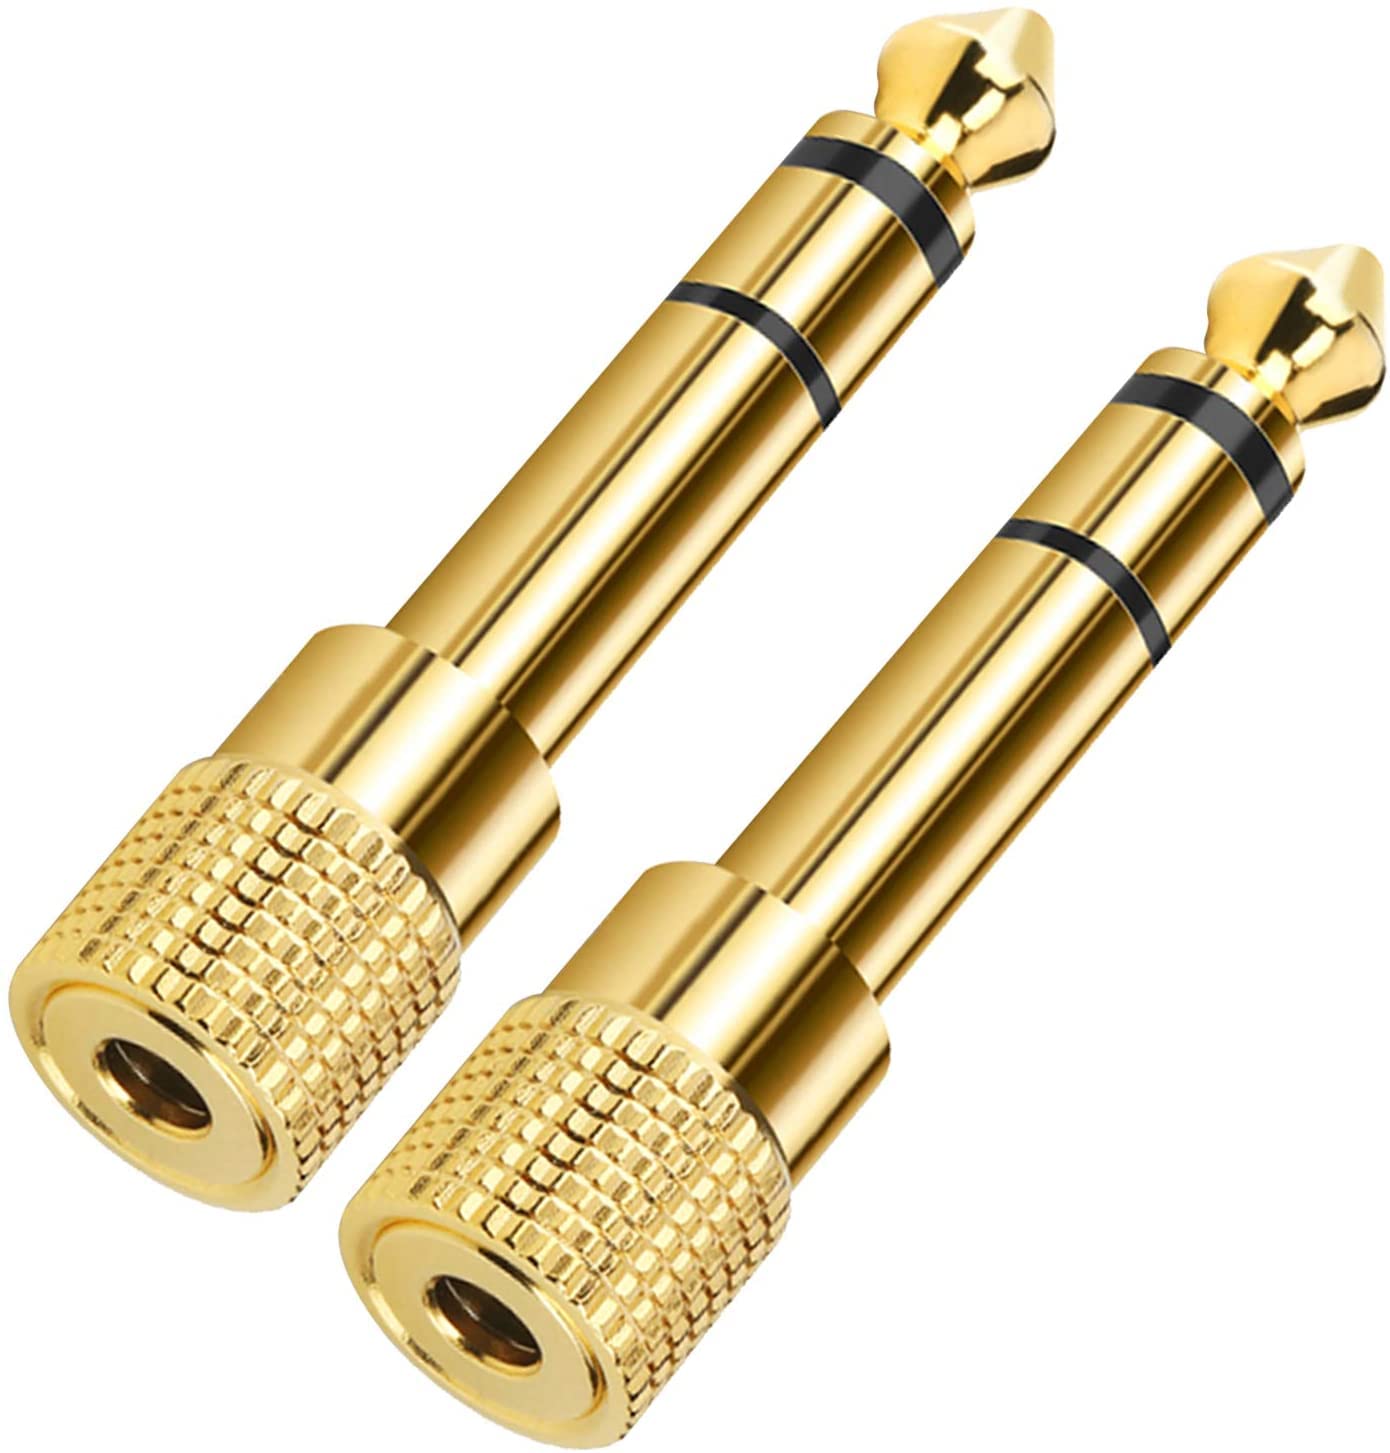 6.5mm to 3.5MM GOLD PLATED